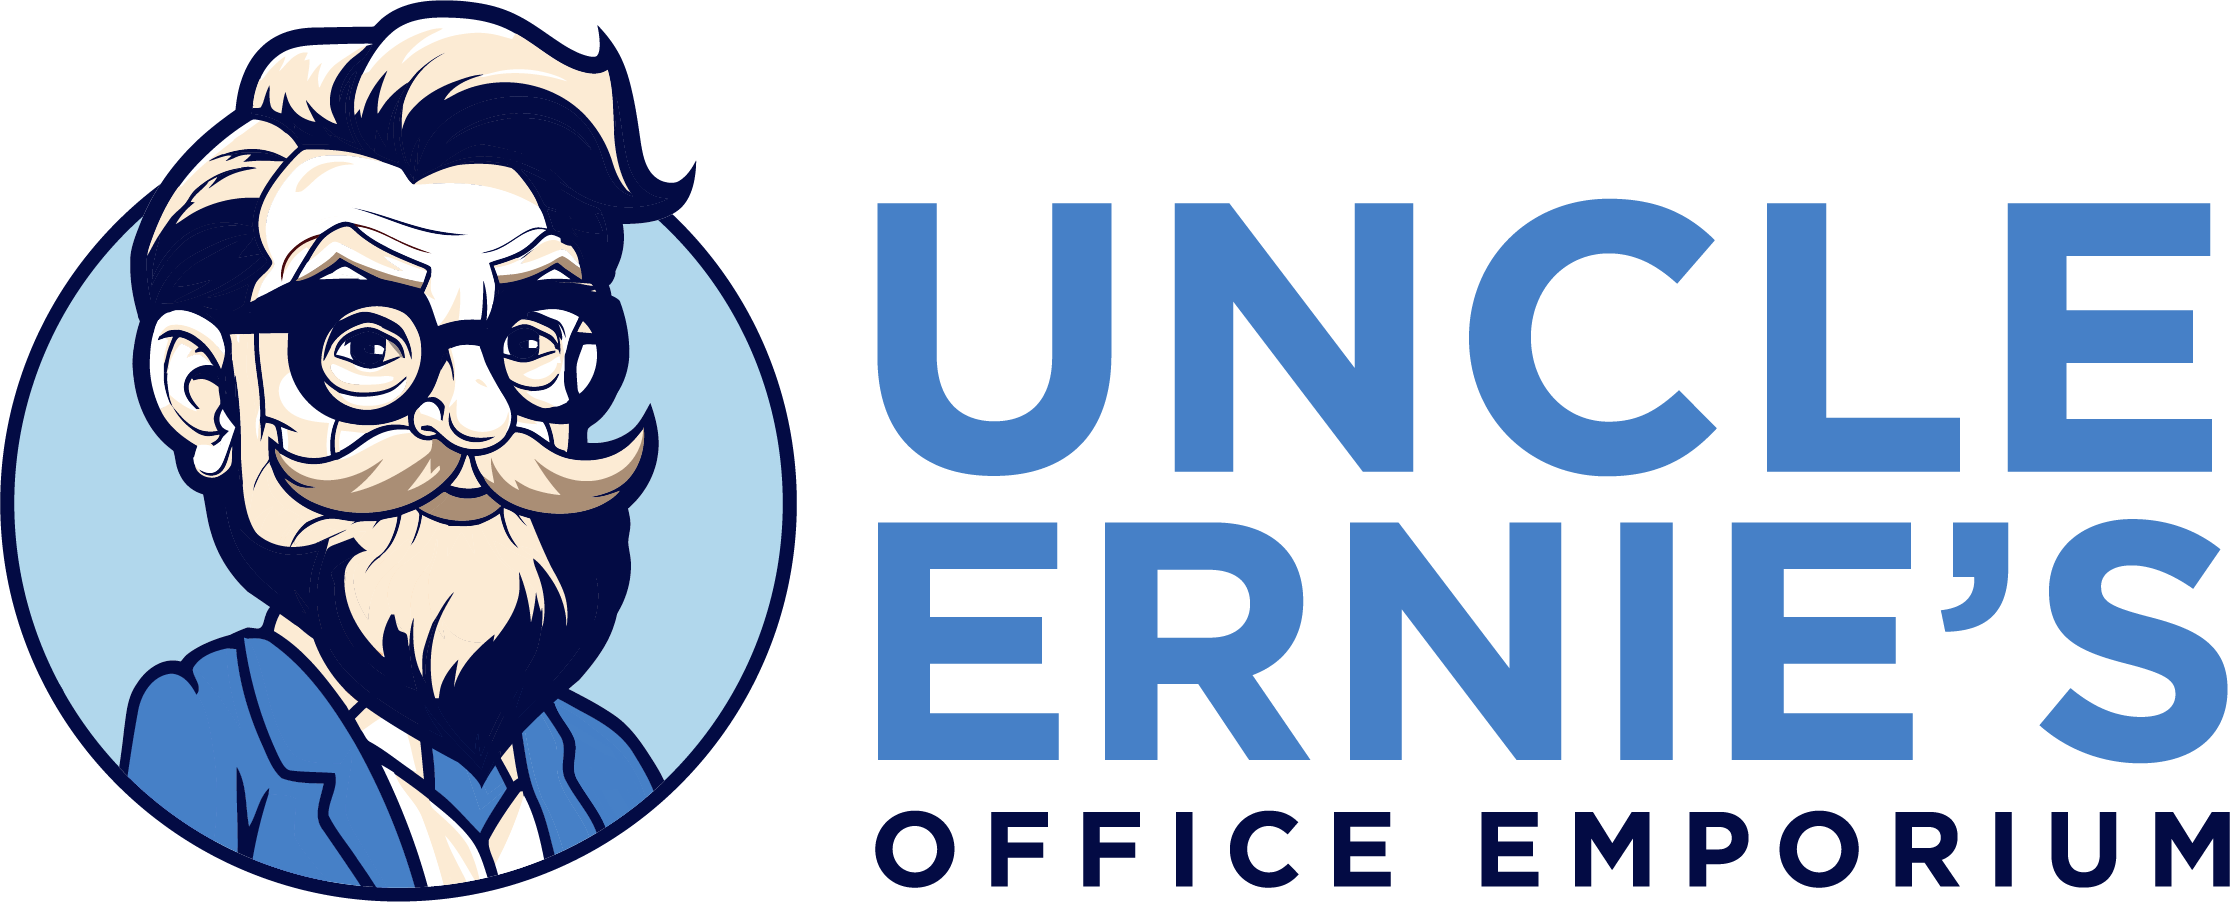 Uncle Ernie’s Office Emporium Launches Game-Changing Computer Accessories to Transform Desk Experience